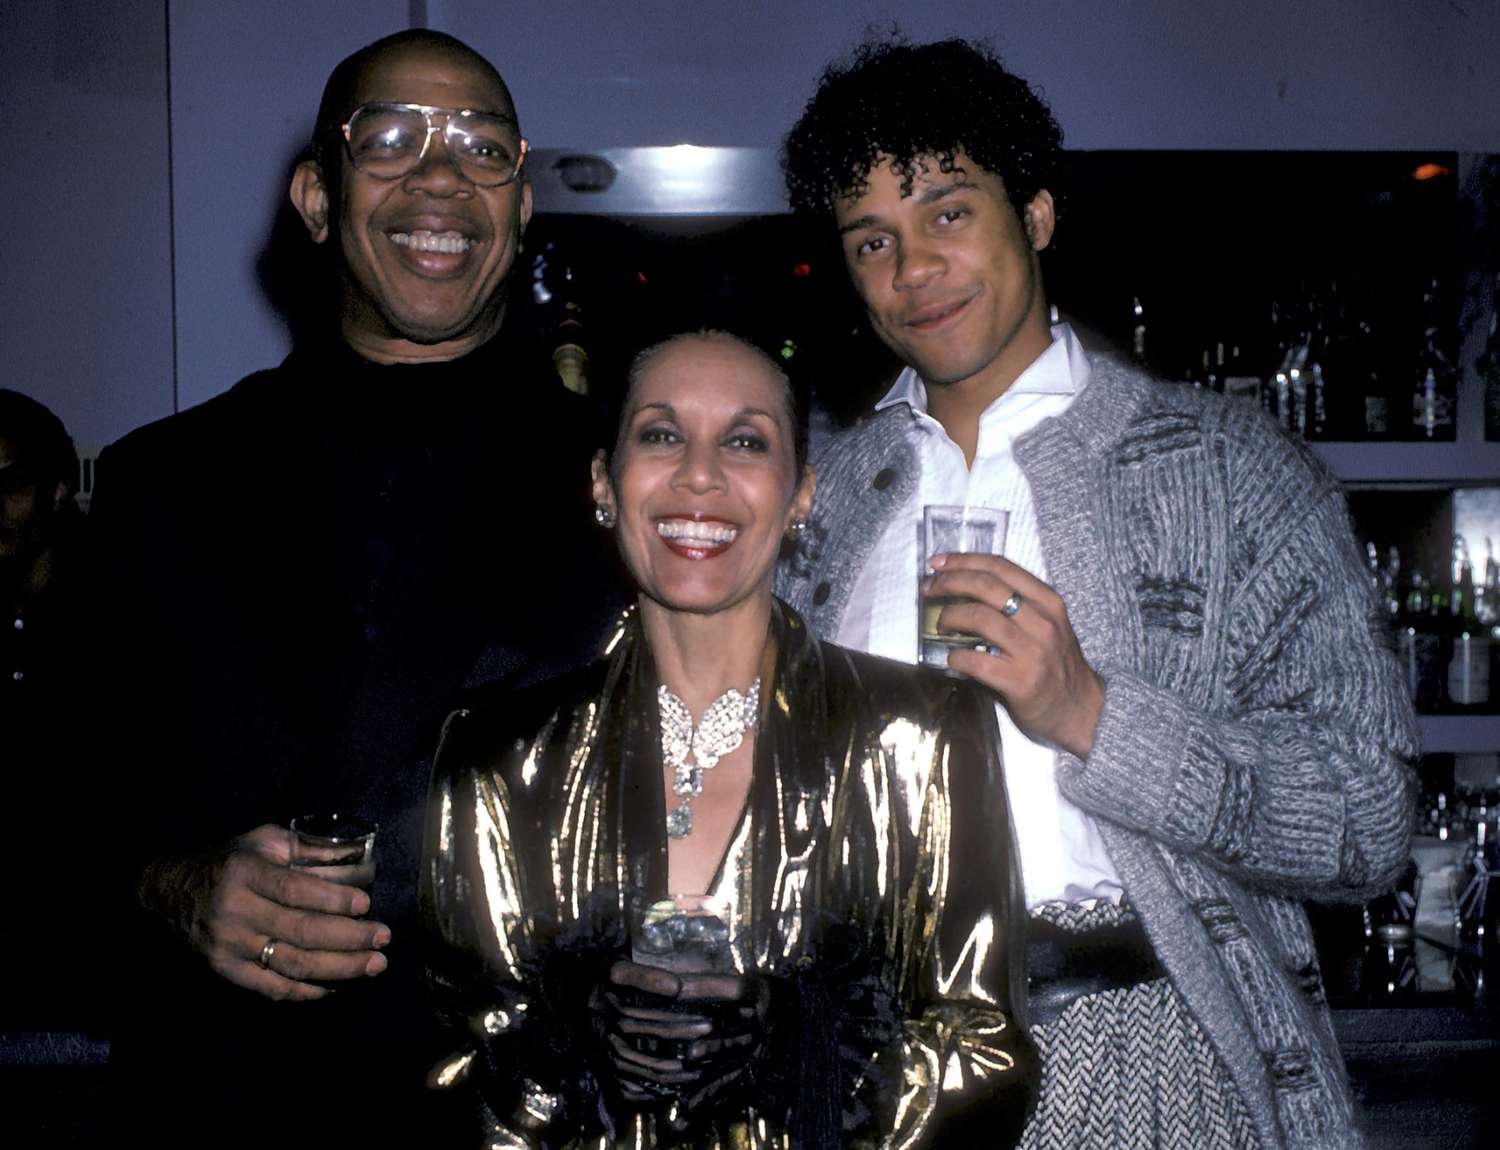 An image of Geoffrey Holder, wife Carmen De Lavallade, and their son Leo.